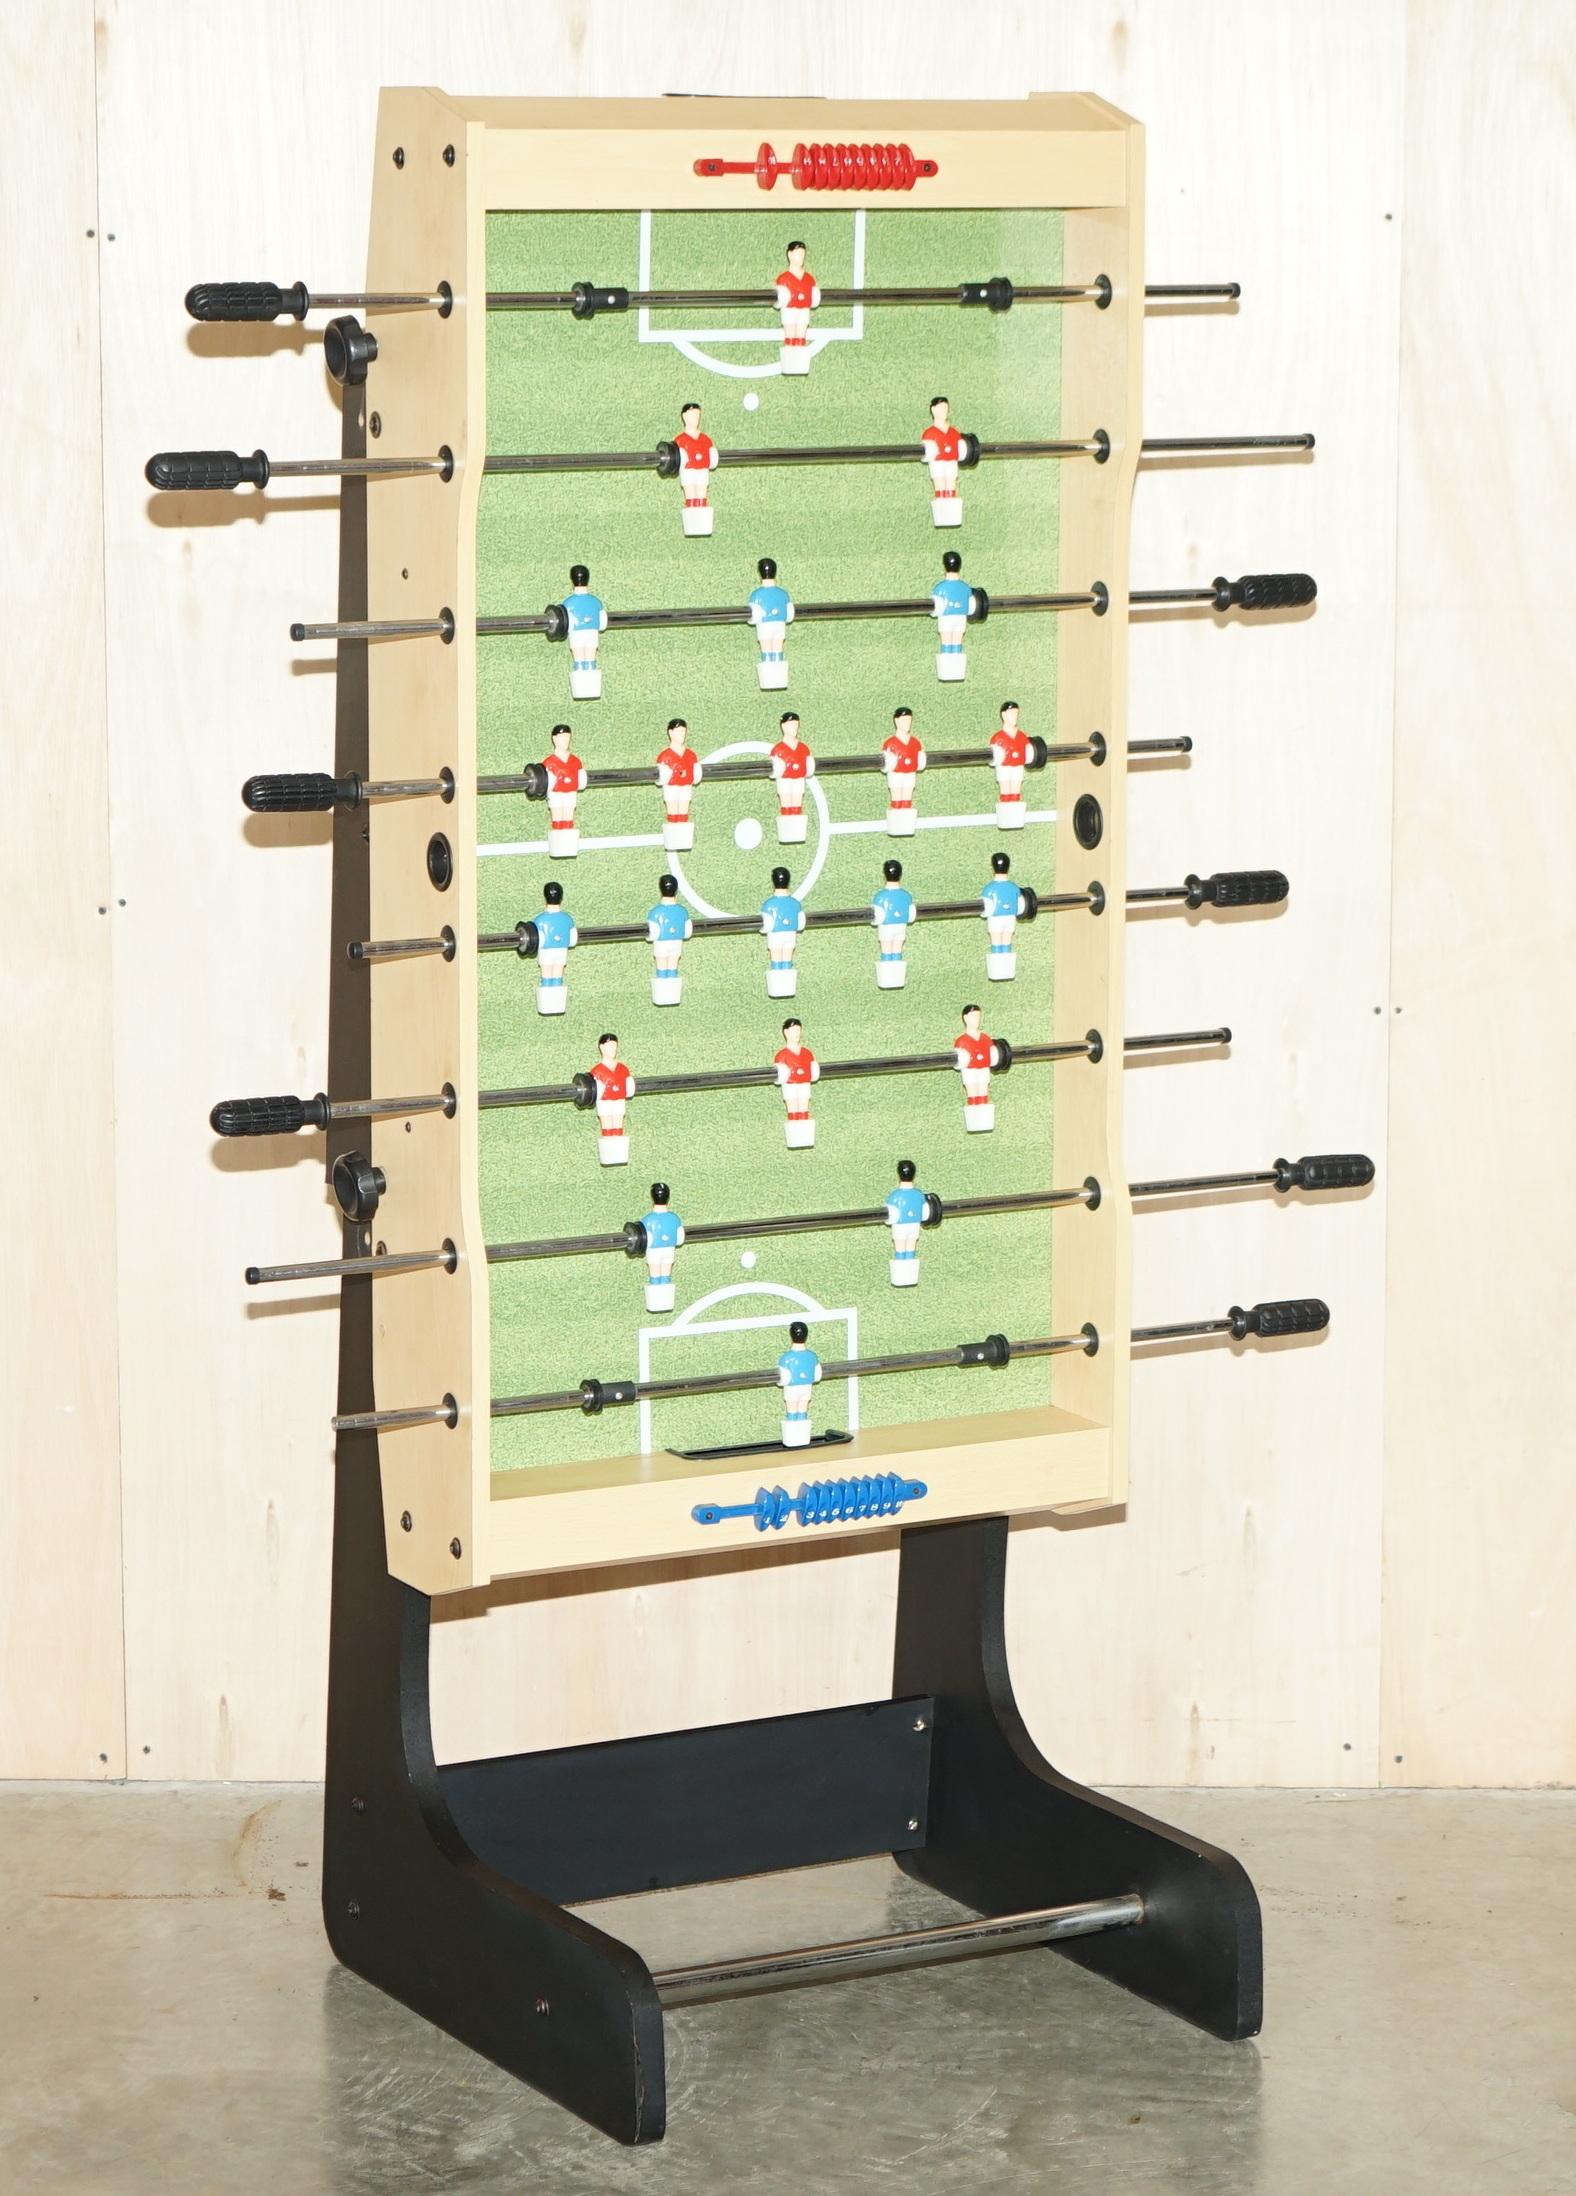 We are delighted to offer for sale this nice fold away foosball table

A good looking decorative and usable piece to keep the kids (and adults!) busy this summer holidays!

Condition wise it has been deep cleaned, hand condition waxed and hand